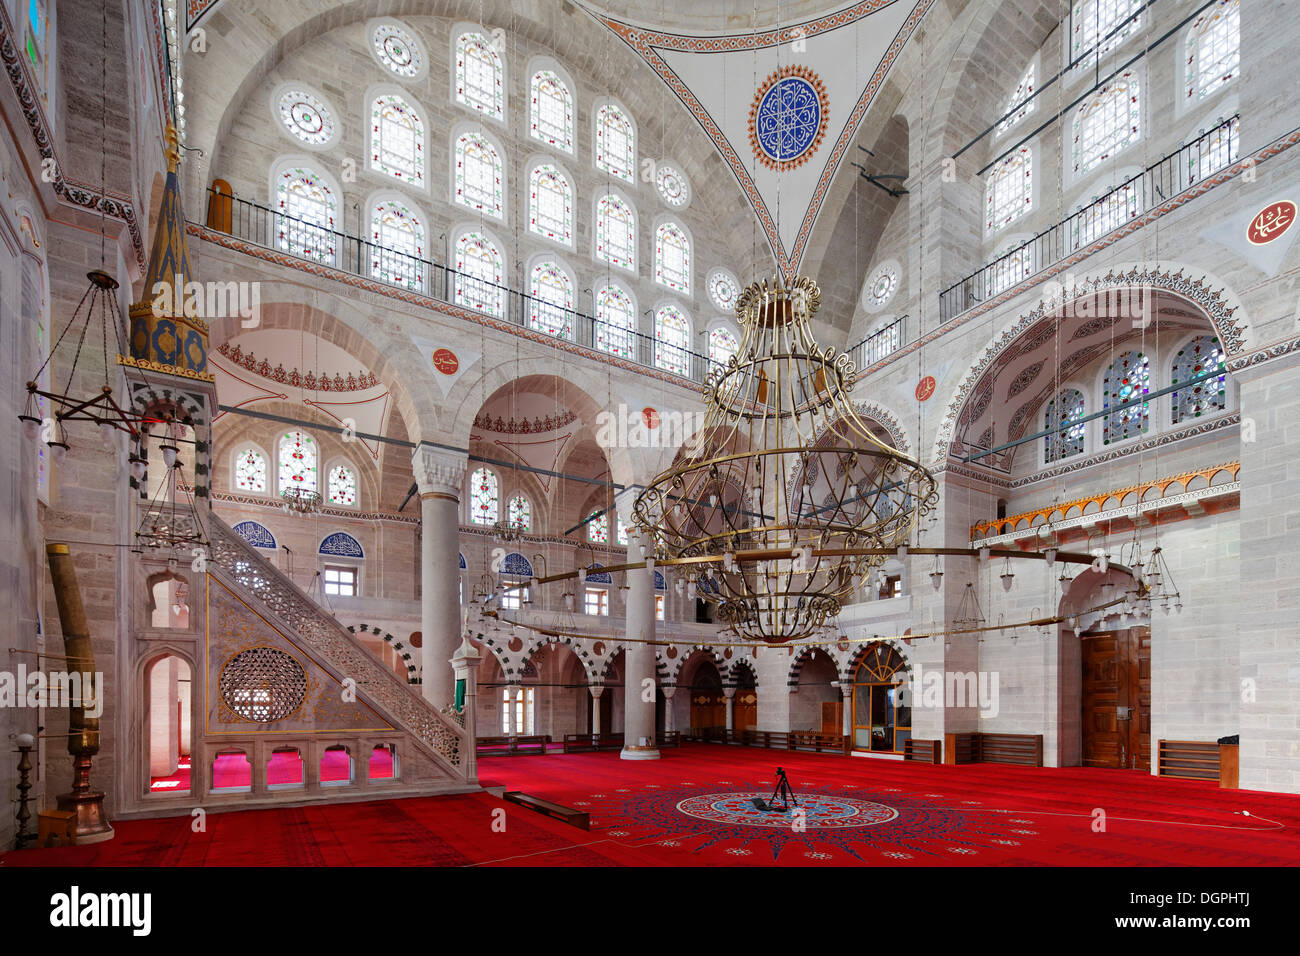 Mihrimah Mosque, Mihrimah Sultan Mosque by the architect Sinan, Edirnekapı, Istanbul, European side, Istanbul Province, Turkey Stock Photo